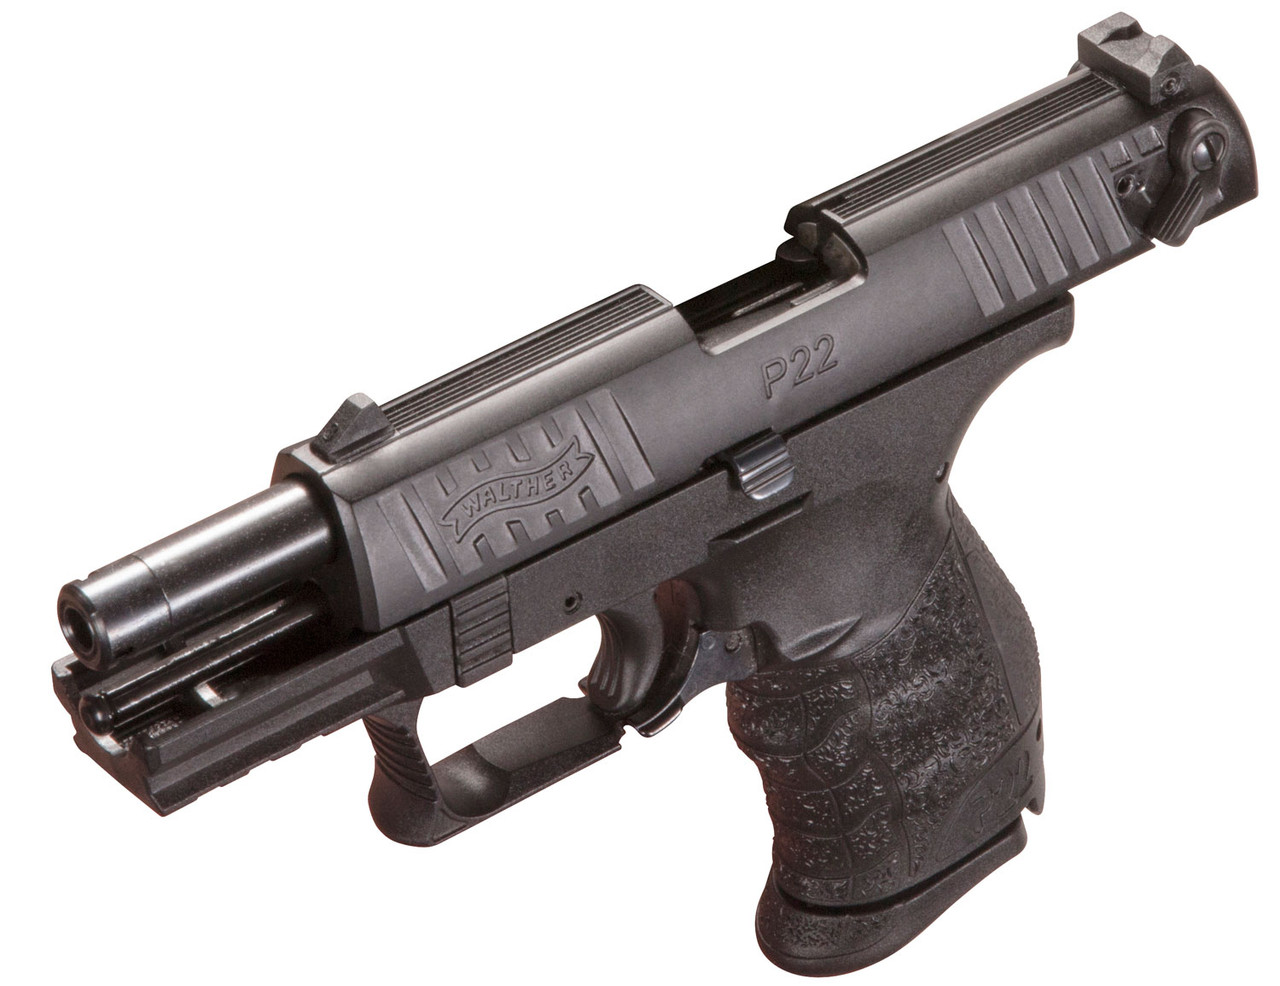  walther p22 special operations, black airsoft gun(Airsoft Gun)  : Airsoft Pistols : Sports & Outdoors